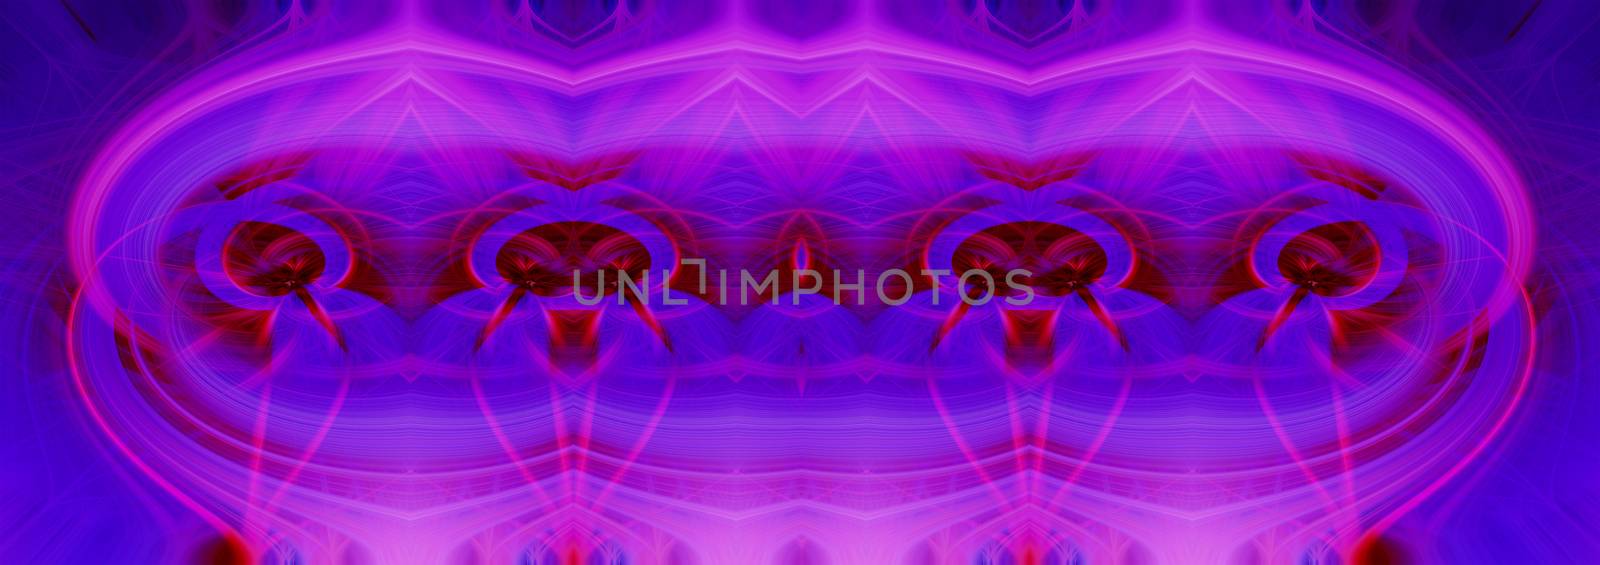 Beautiful abstract intertwined 3d fibers forming a shape of sparkle, flame, flower, interlinked hearts. Blue, maroon, pink, and purple colors. Banner size. Illustration.